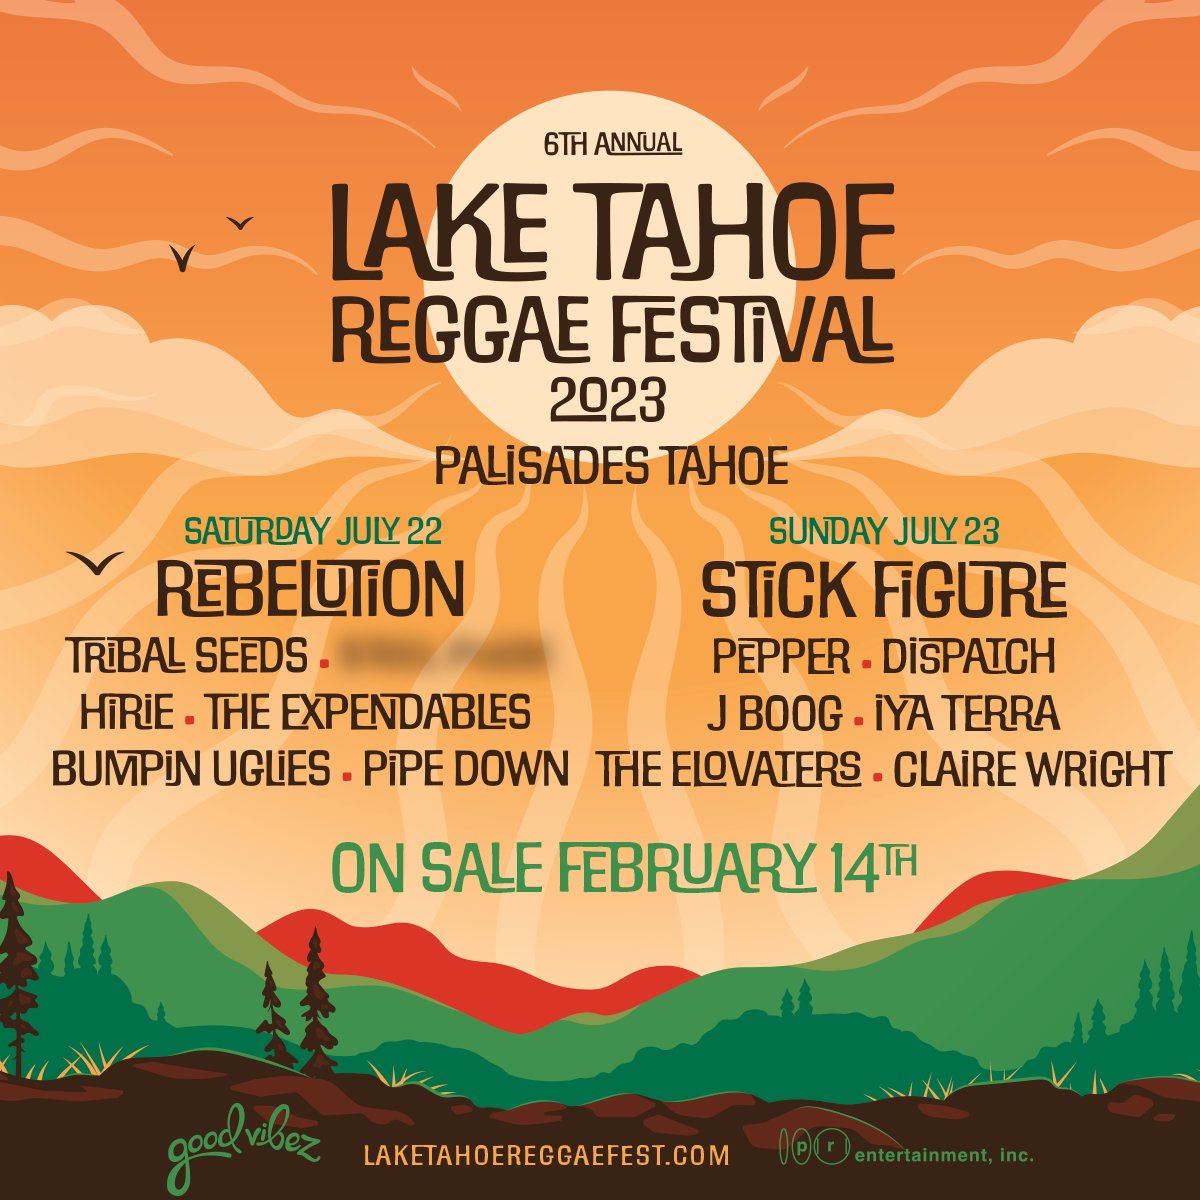 Catch us at the Lake Tahoe Reggae Festival on July 23rd!🤩 Tickets are on sale February 14th at 10am PT 📷️: @mikedenim